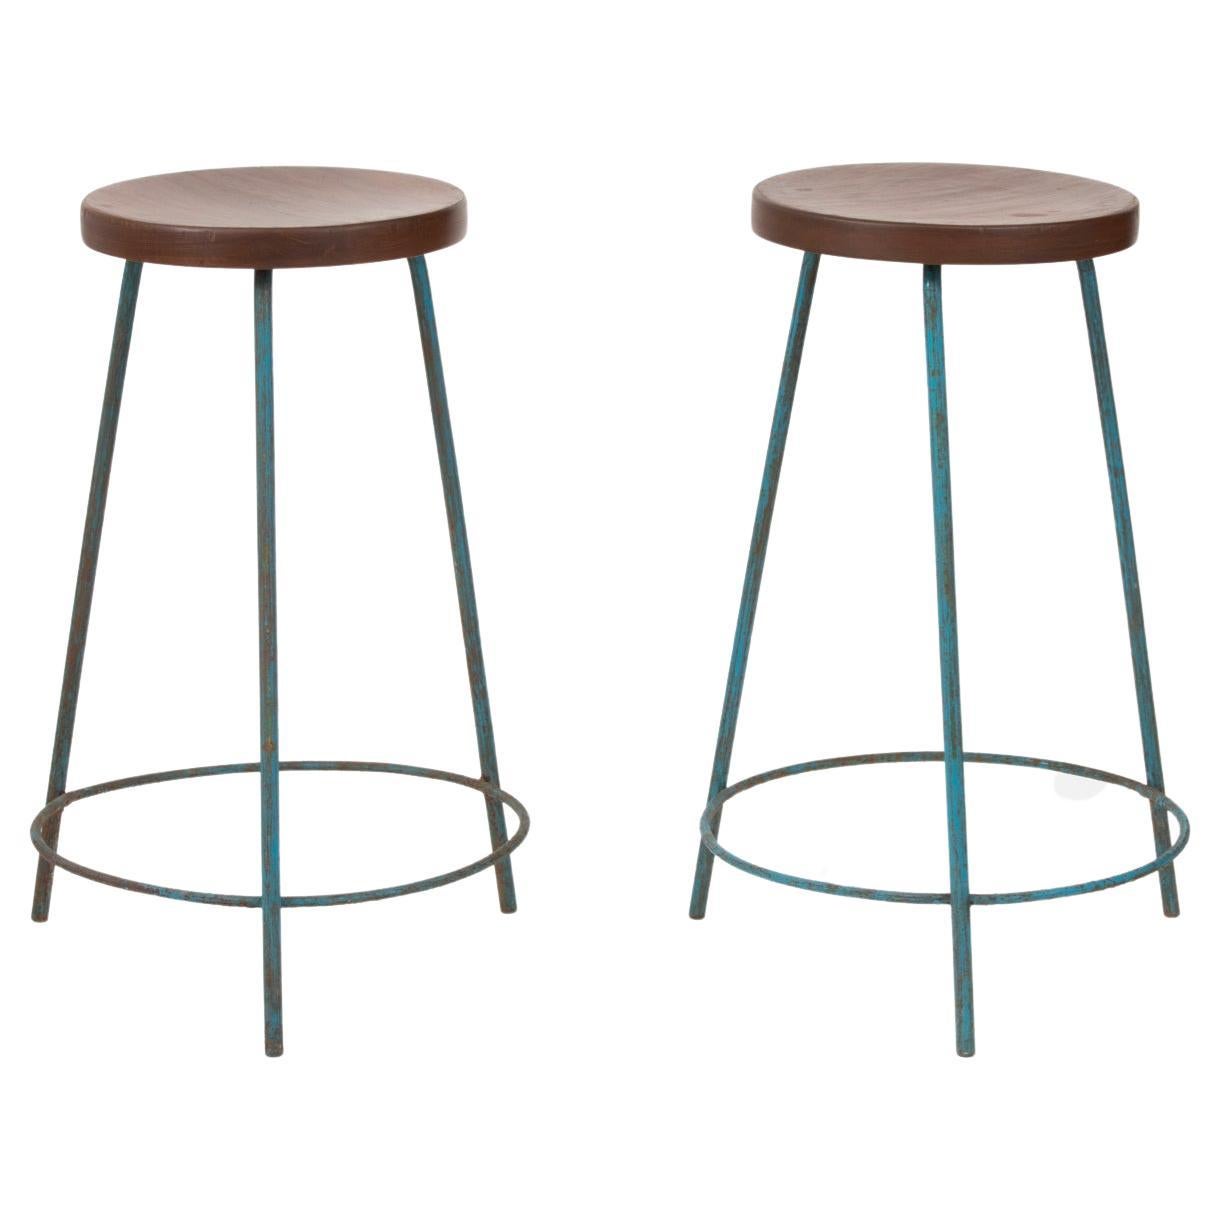 Pair of Vintage Pierre Jeanneret Architects Work / Bar Stools PJ-SI-57-A